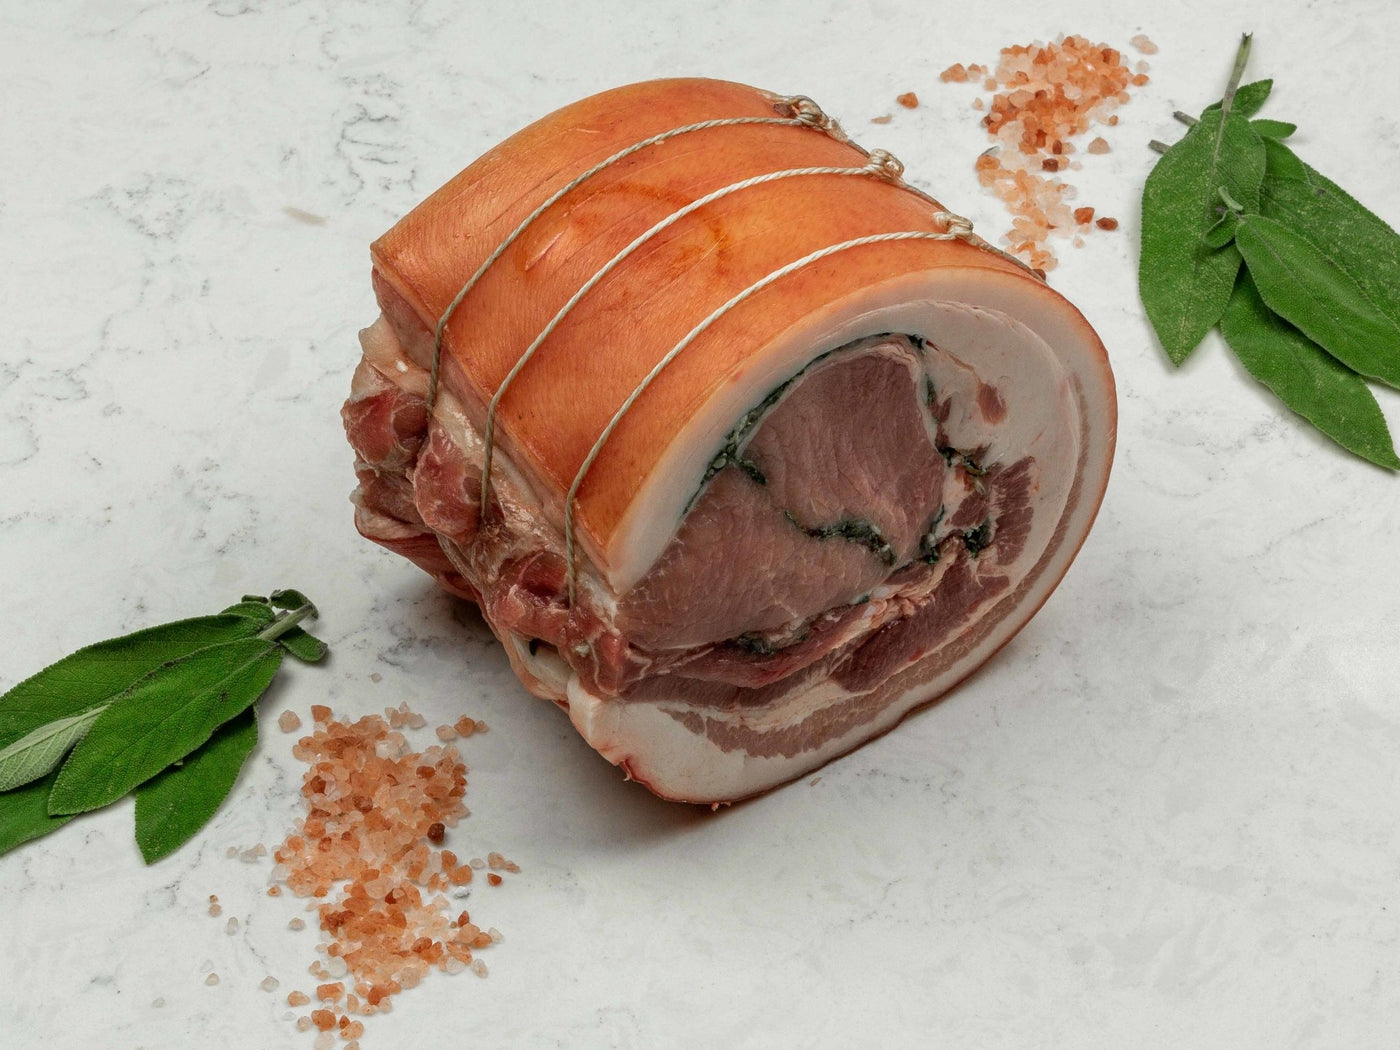 7 Day Dry-Aged, Free Range Porchetta Box, With All The Trimmings - Thomas Joseph Butchery - Ethical Dry-Aged Meat The Best Steak UK Thomas Joseph Butchery